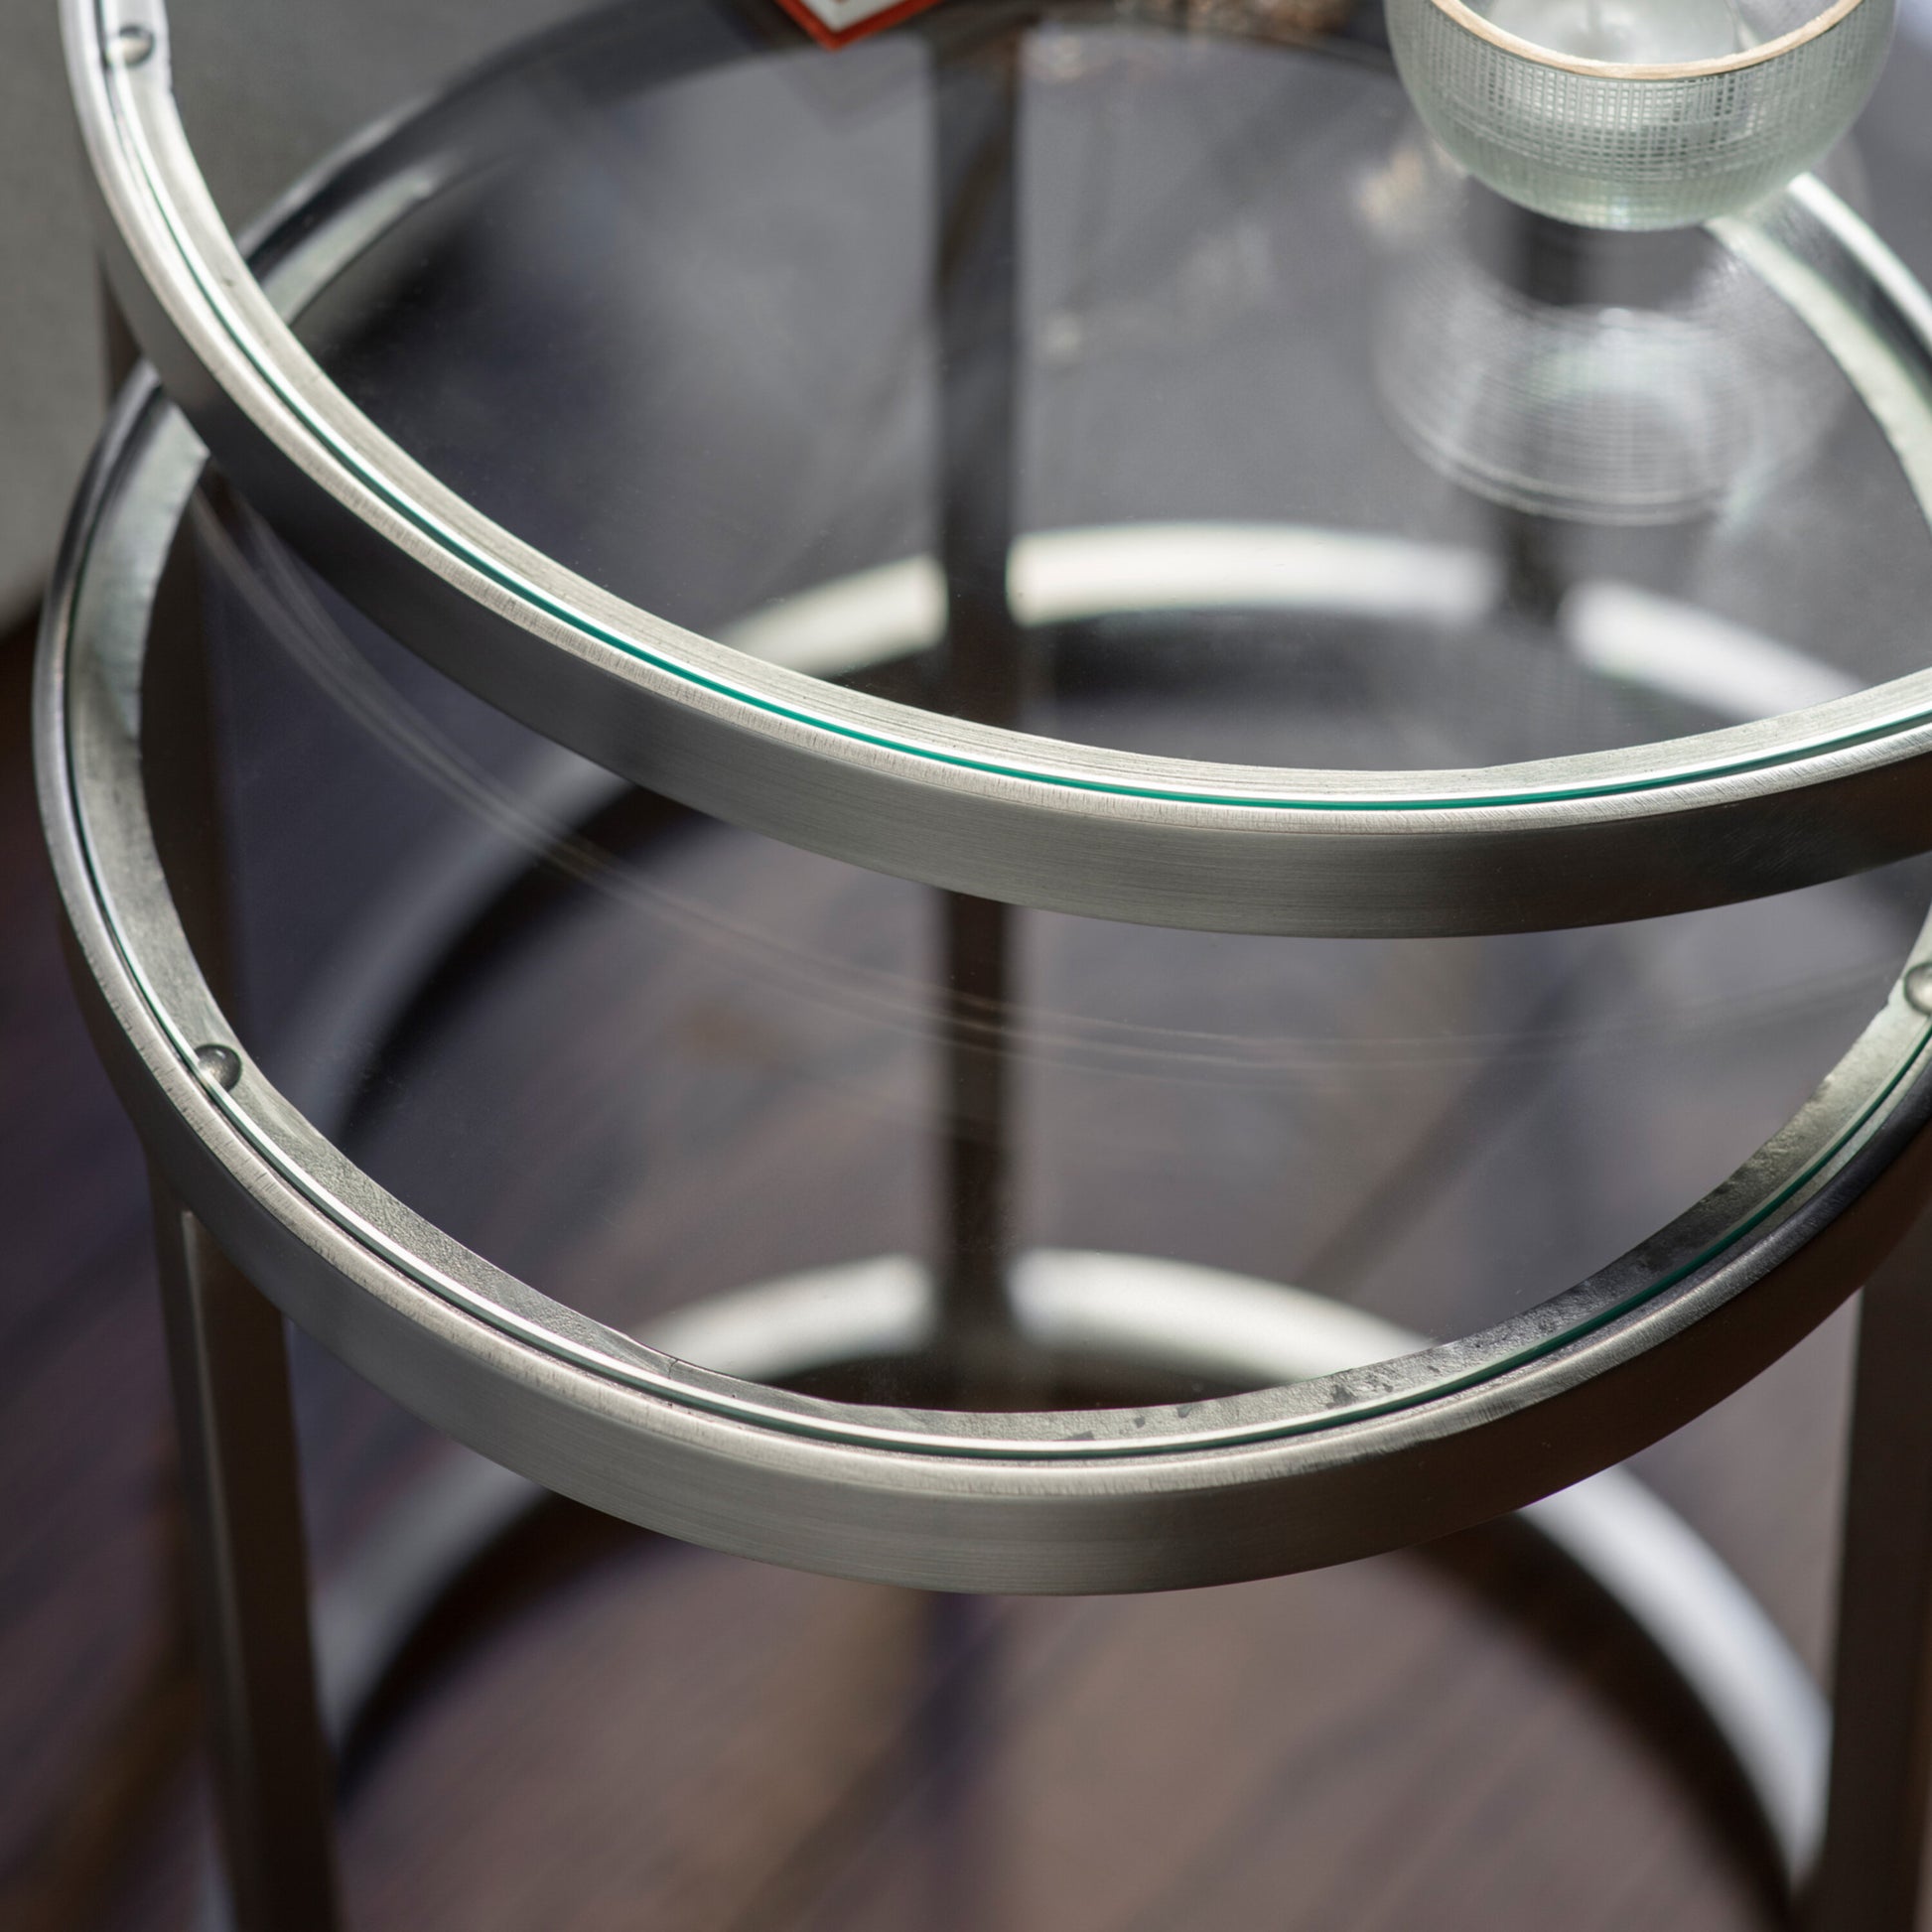 Rowe Nest of Two Tables | Silver